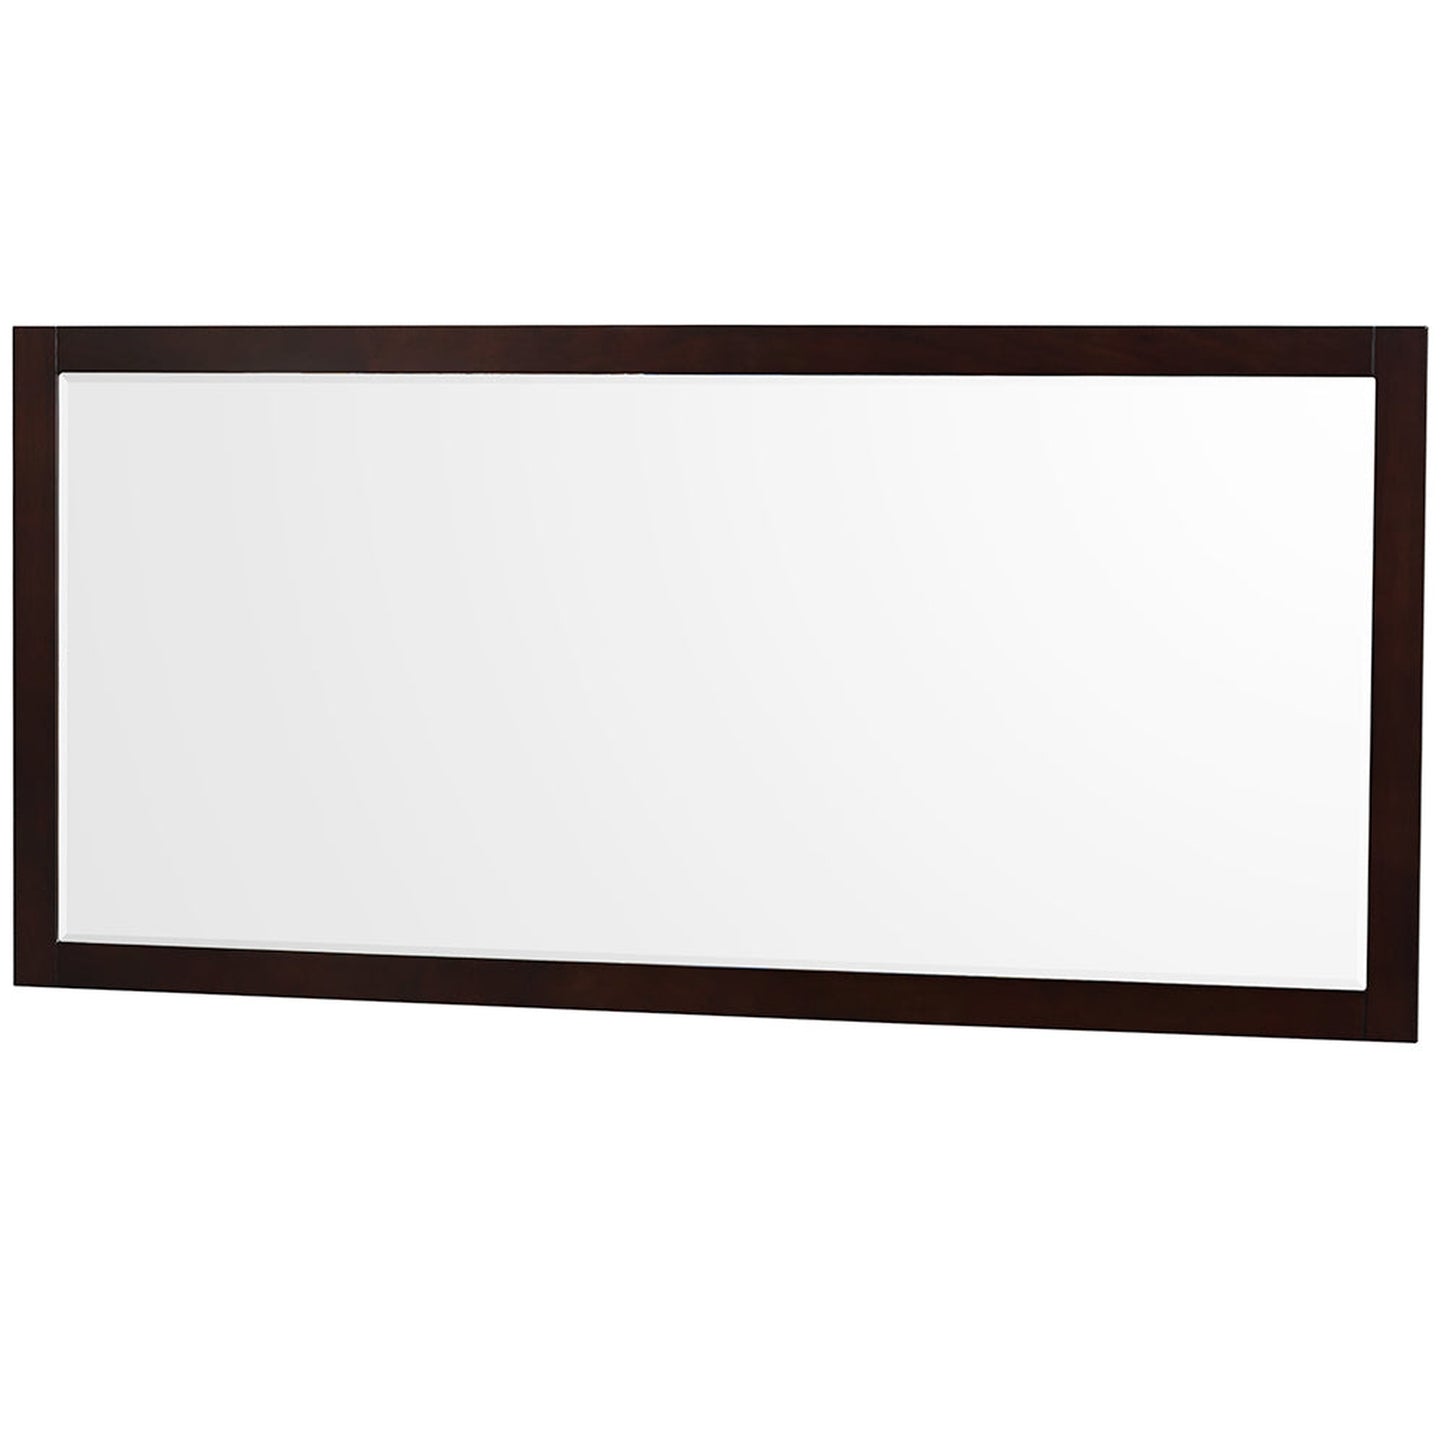 Wyndham Collection Sheffield 80" Double Bathroom Vanity in Espresso, White Cultured Marble Countertop, Undermount Square Sinks, 70" Mirror